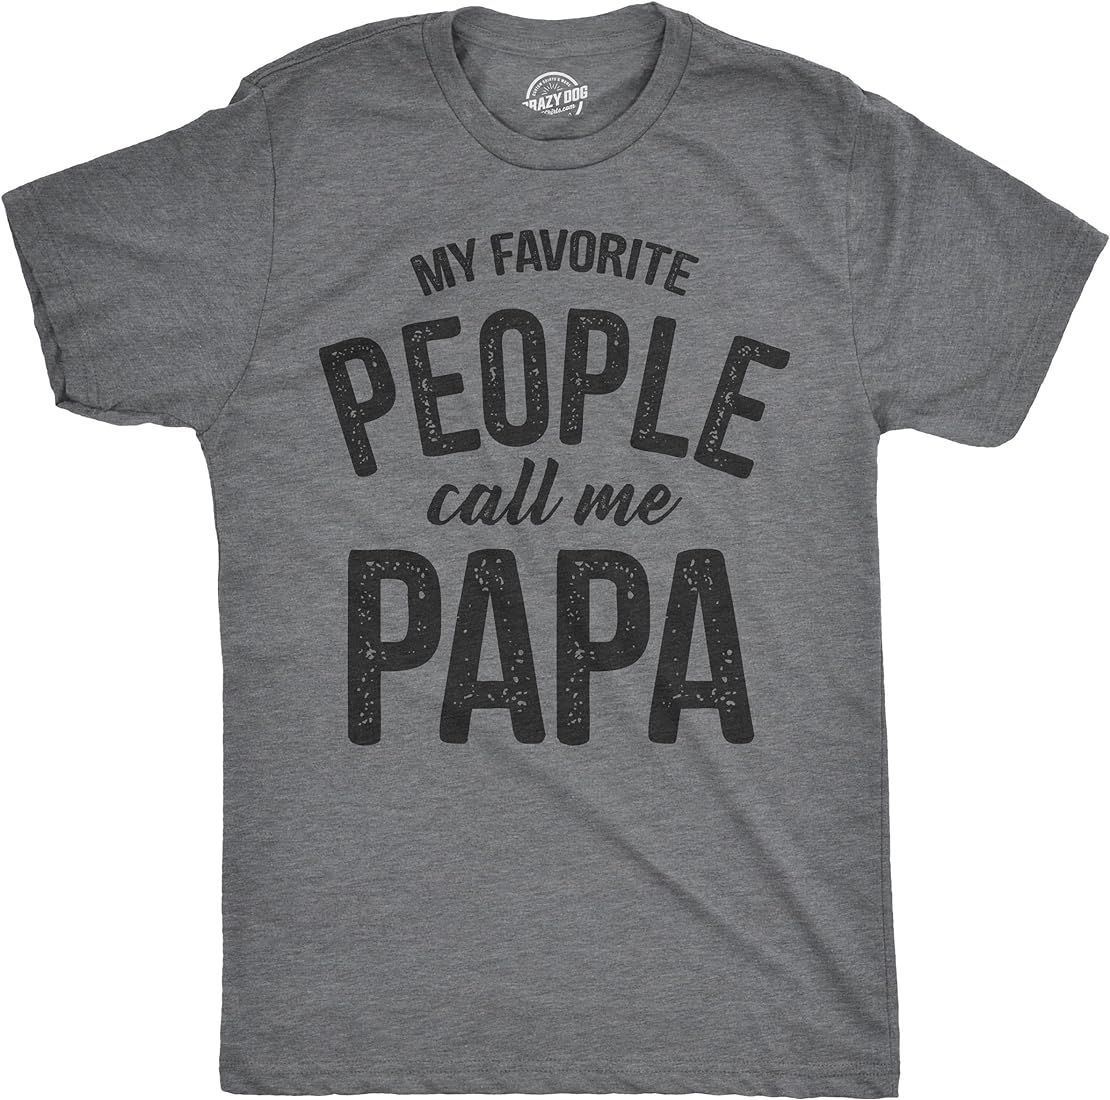 Mens My Favorite People Call Me Papa T Shirt Funny Humor Father Tee for Guys | Amazon (US)